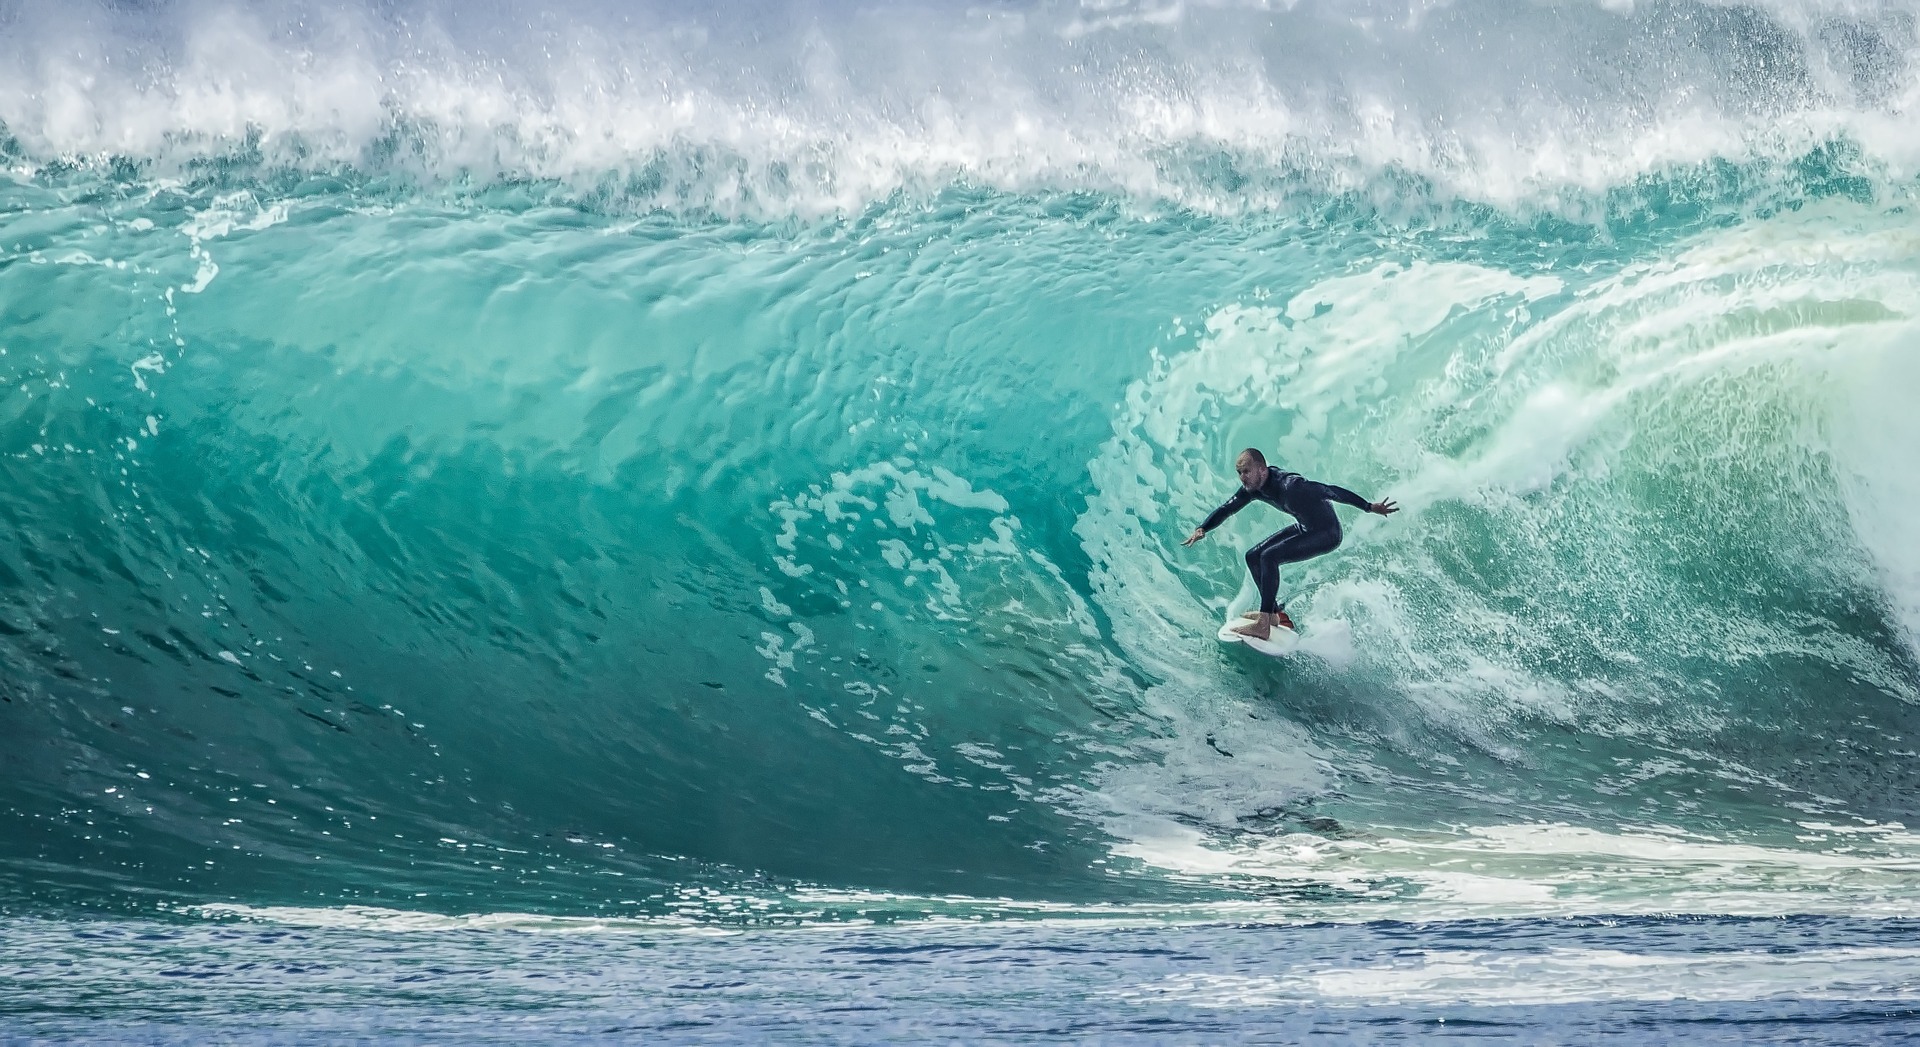 Get the most from your surfing